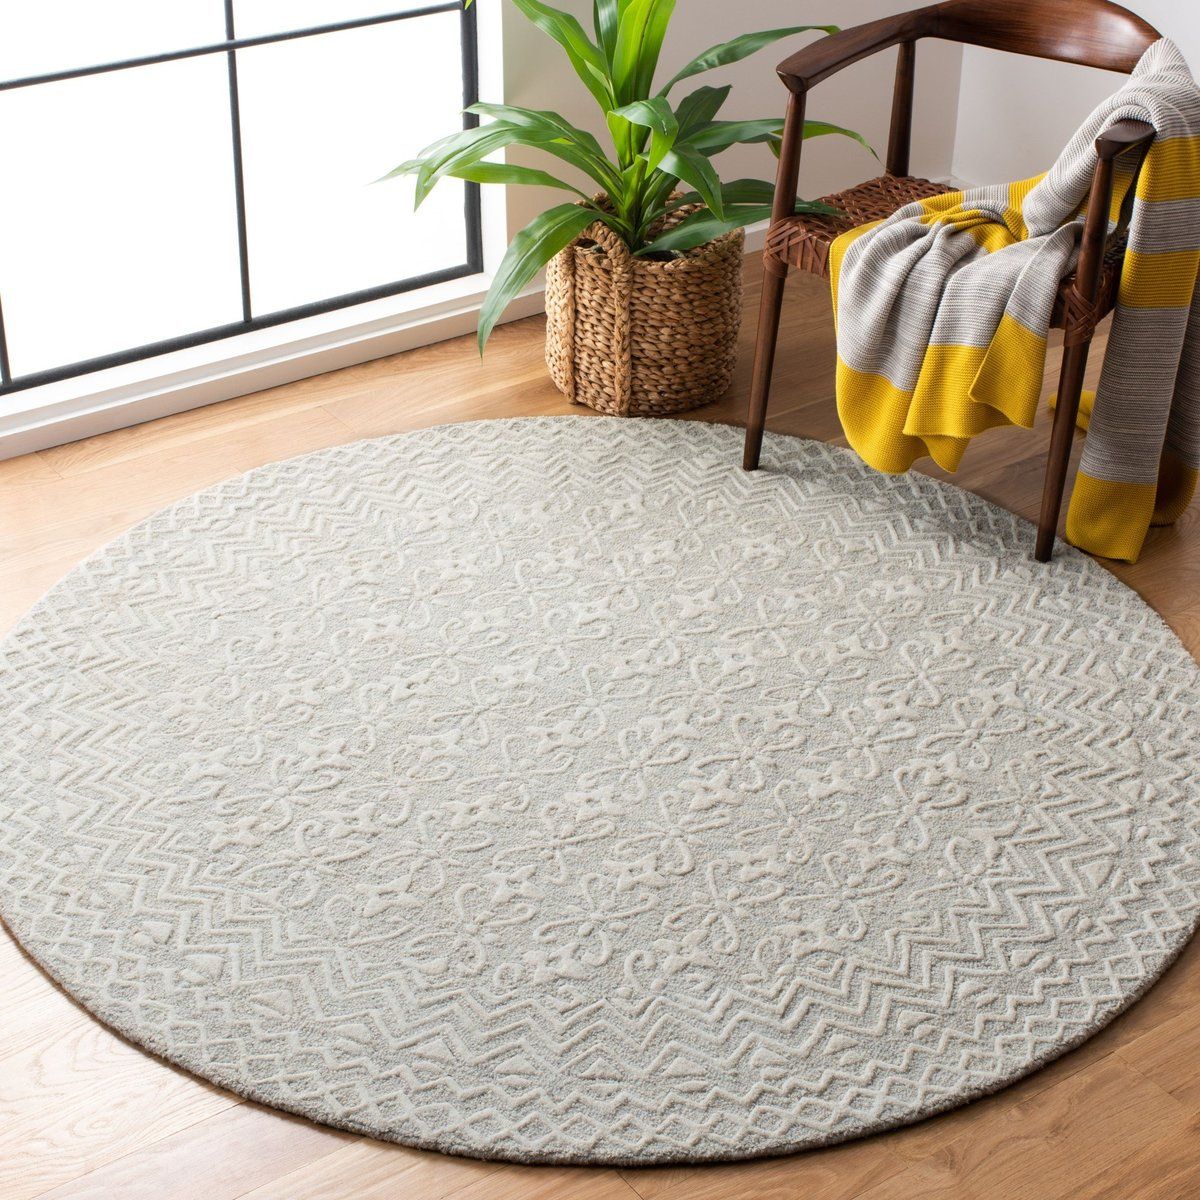 Safavieh Blossom Blm 114 Modern Wool Area Rugs | Rugs Direct Regarding Blossom Oval Rugs (View 9 of 15)